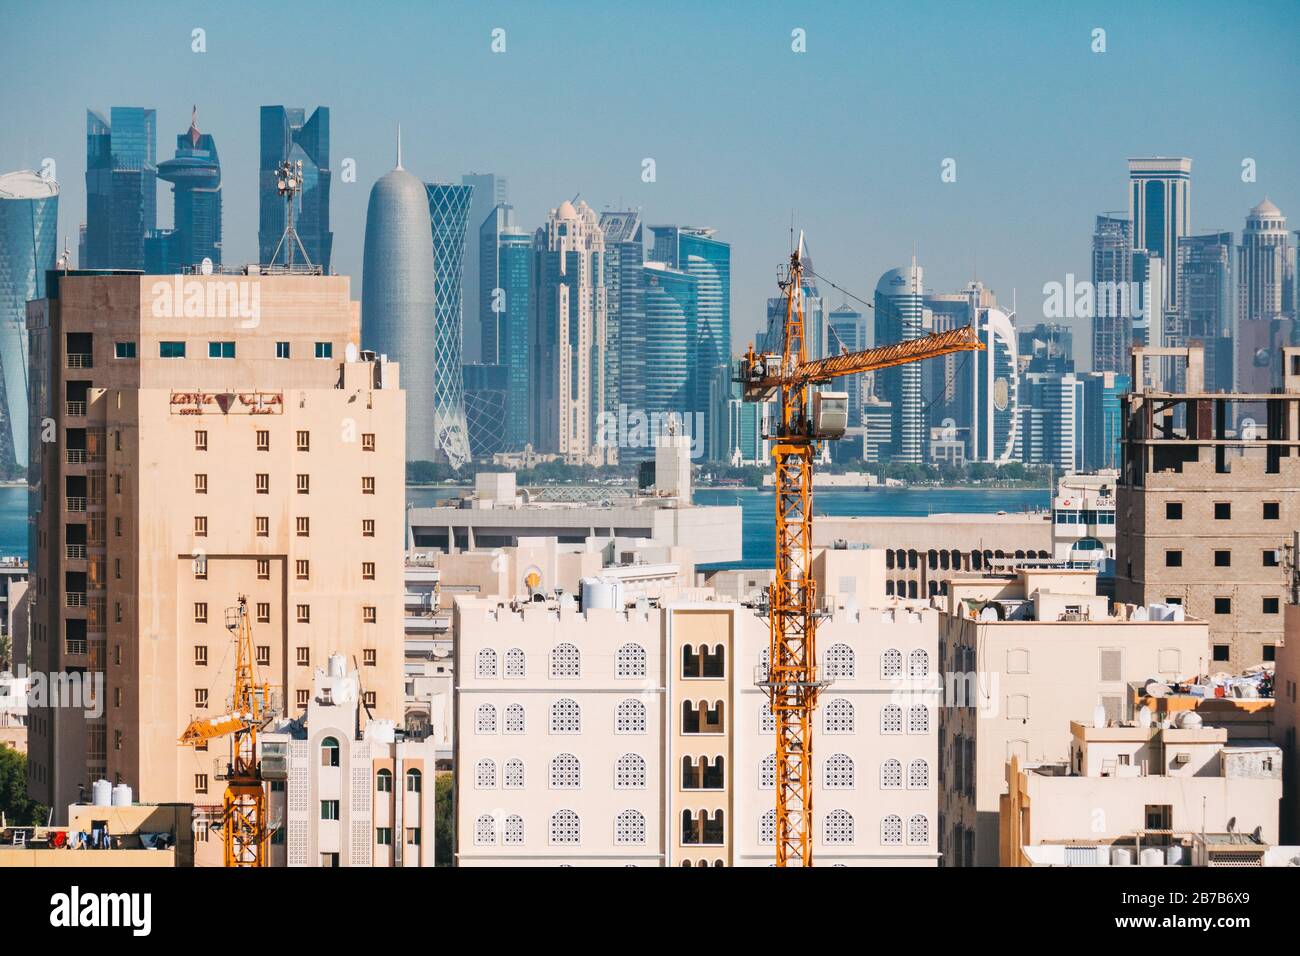 A crane and buildings under construction in Doha's Al Souq area, with the modern financial district skyline visible across the bay in the background Stock Photo